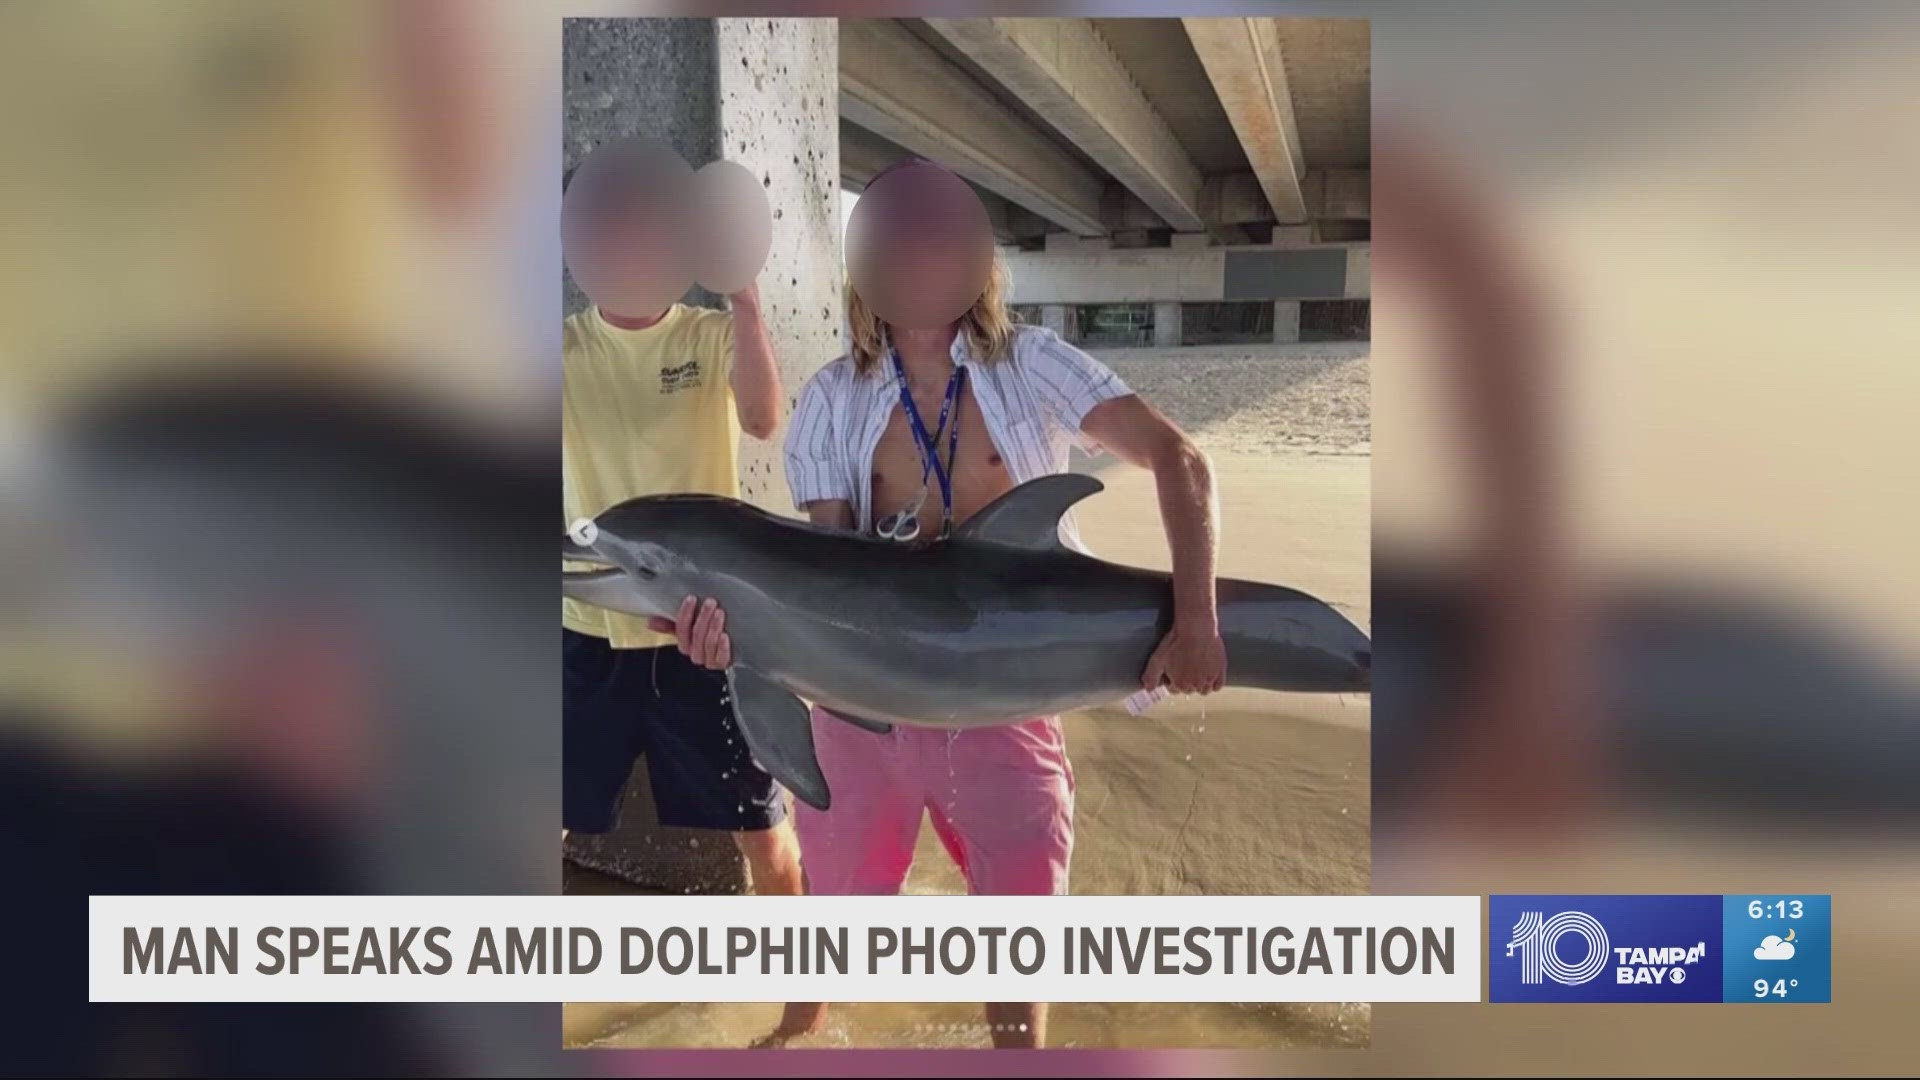 The man claims the dolphin was already dead when he found it. Experts say lifting a dolphin out of the water makes it hard for it to breathe.